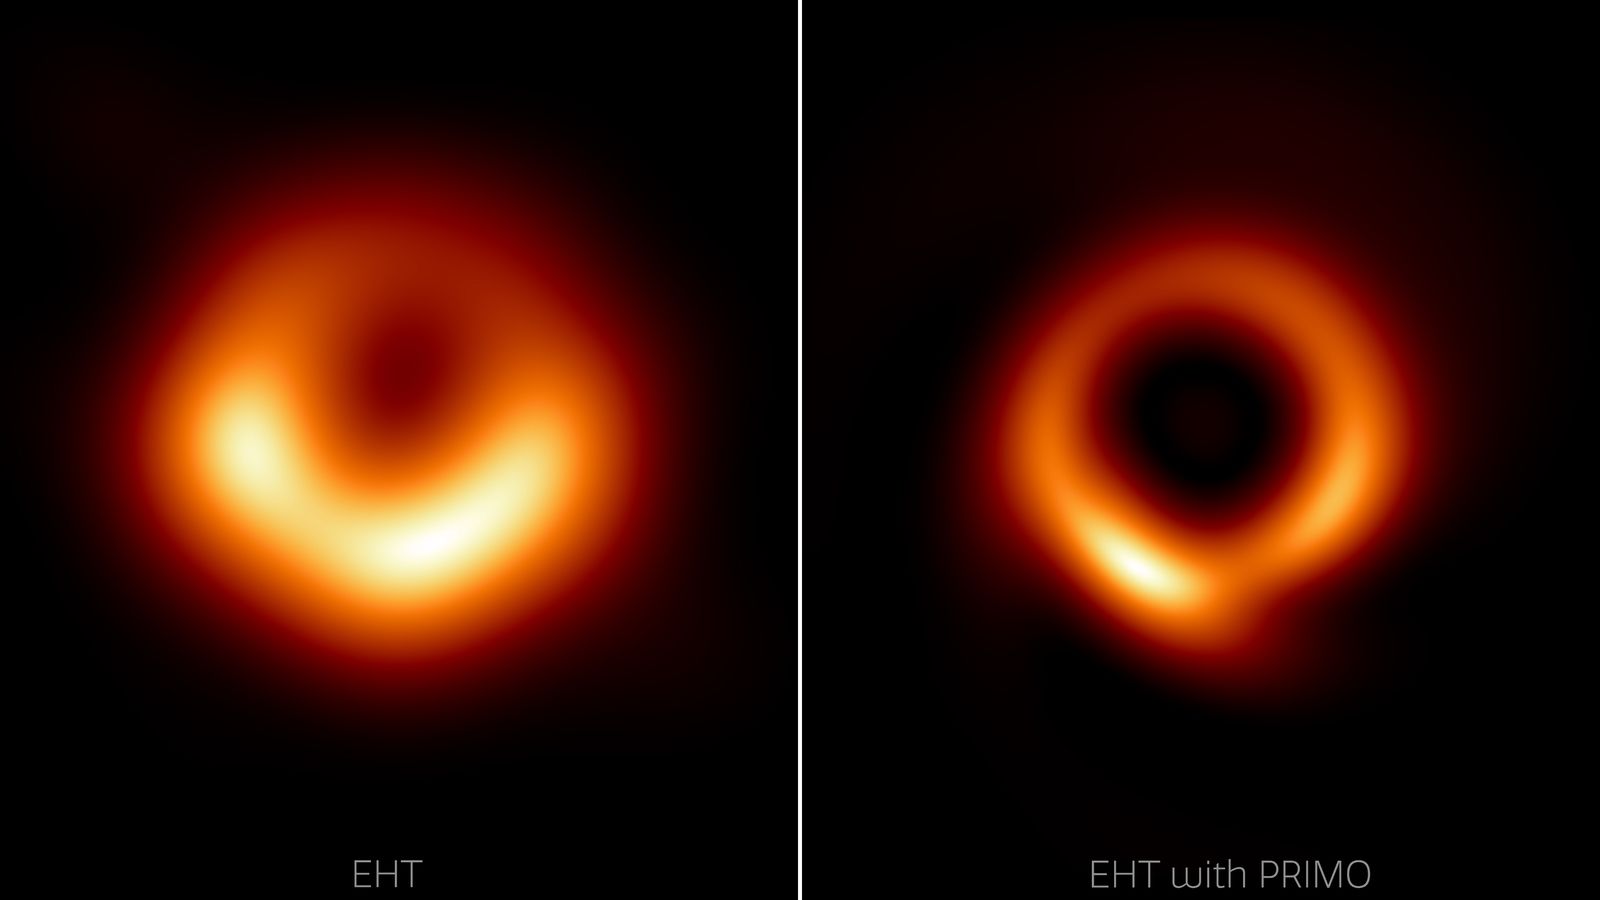 Black hole image captures jet of material launching into space